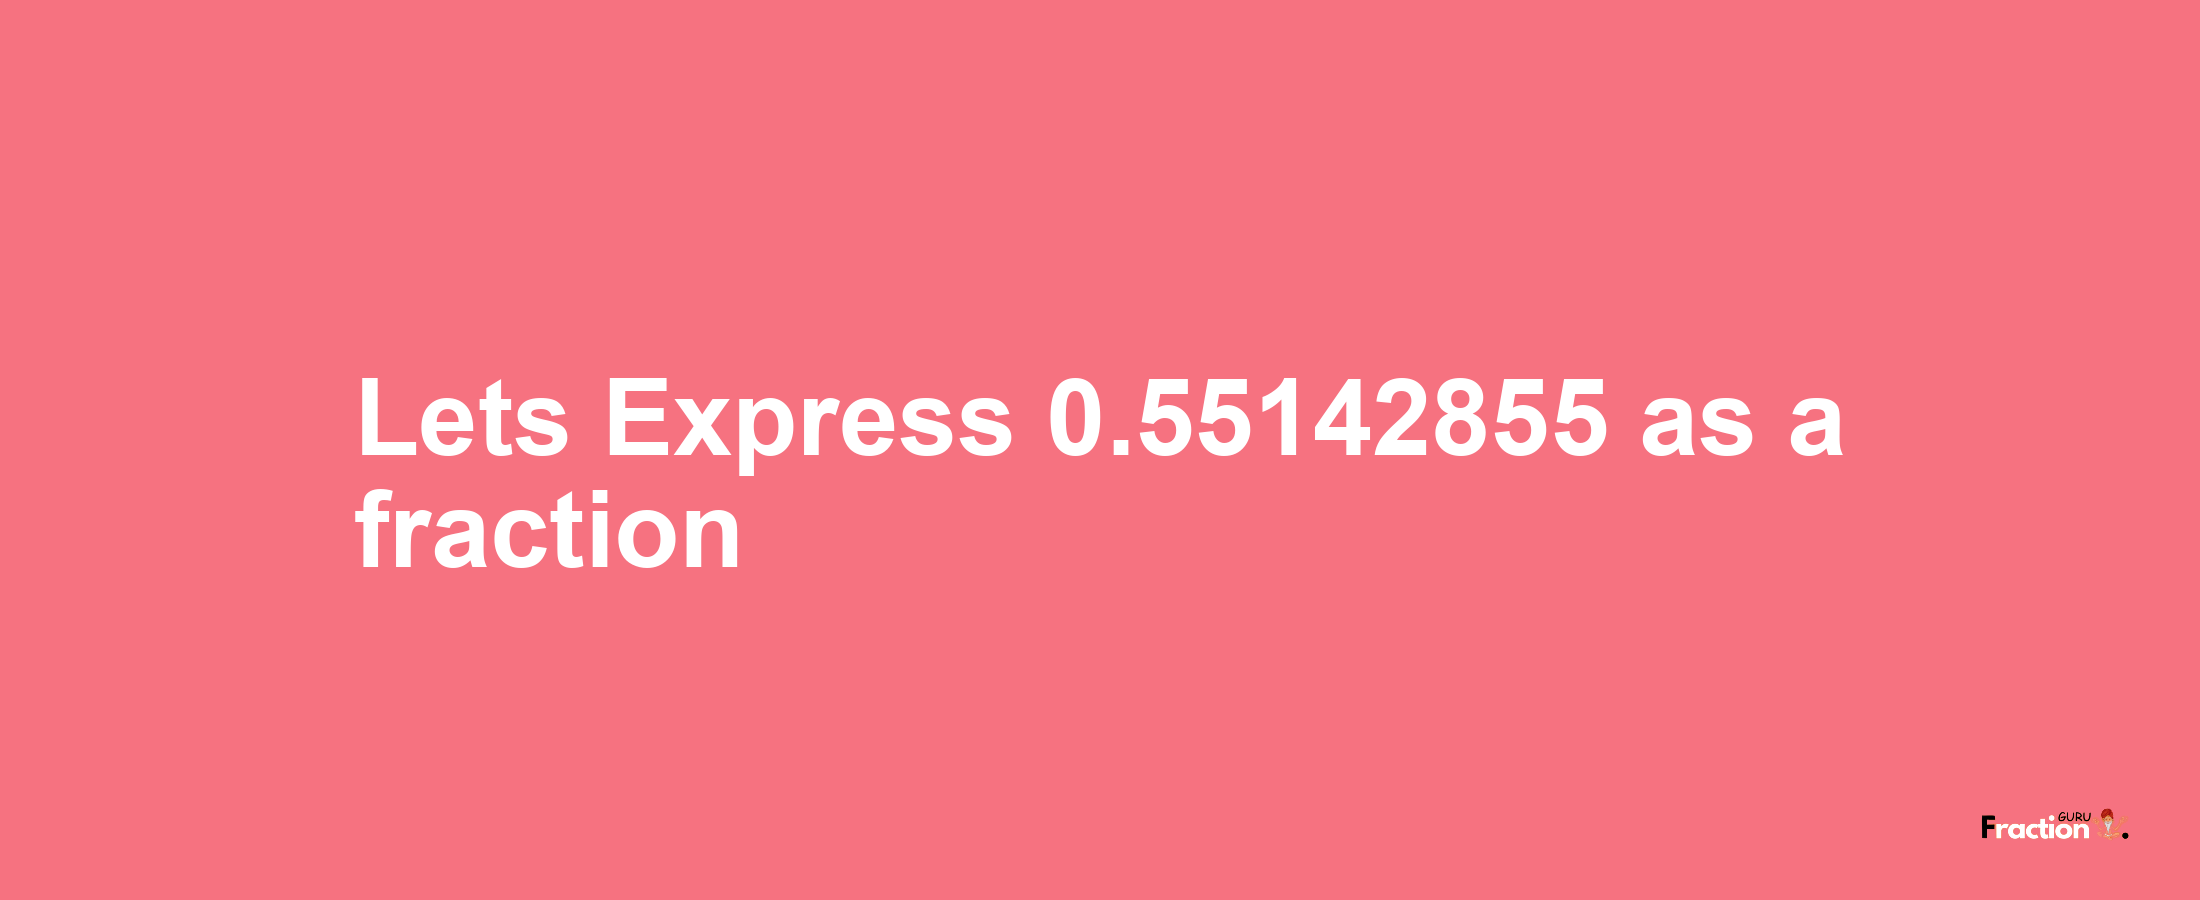 Lets Express 0.55142855 as afraction